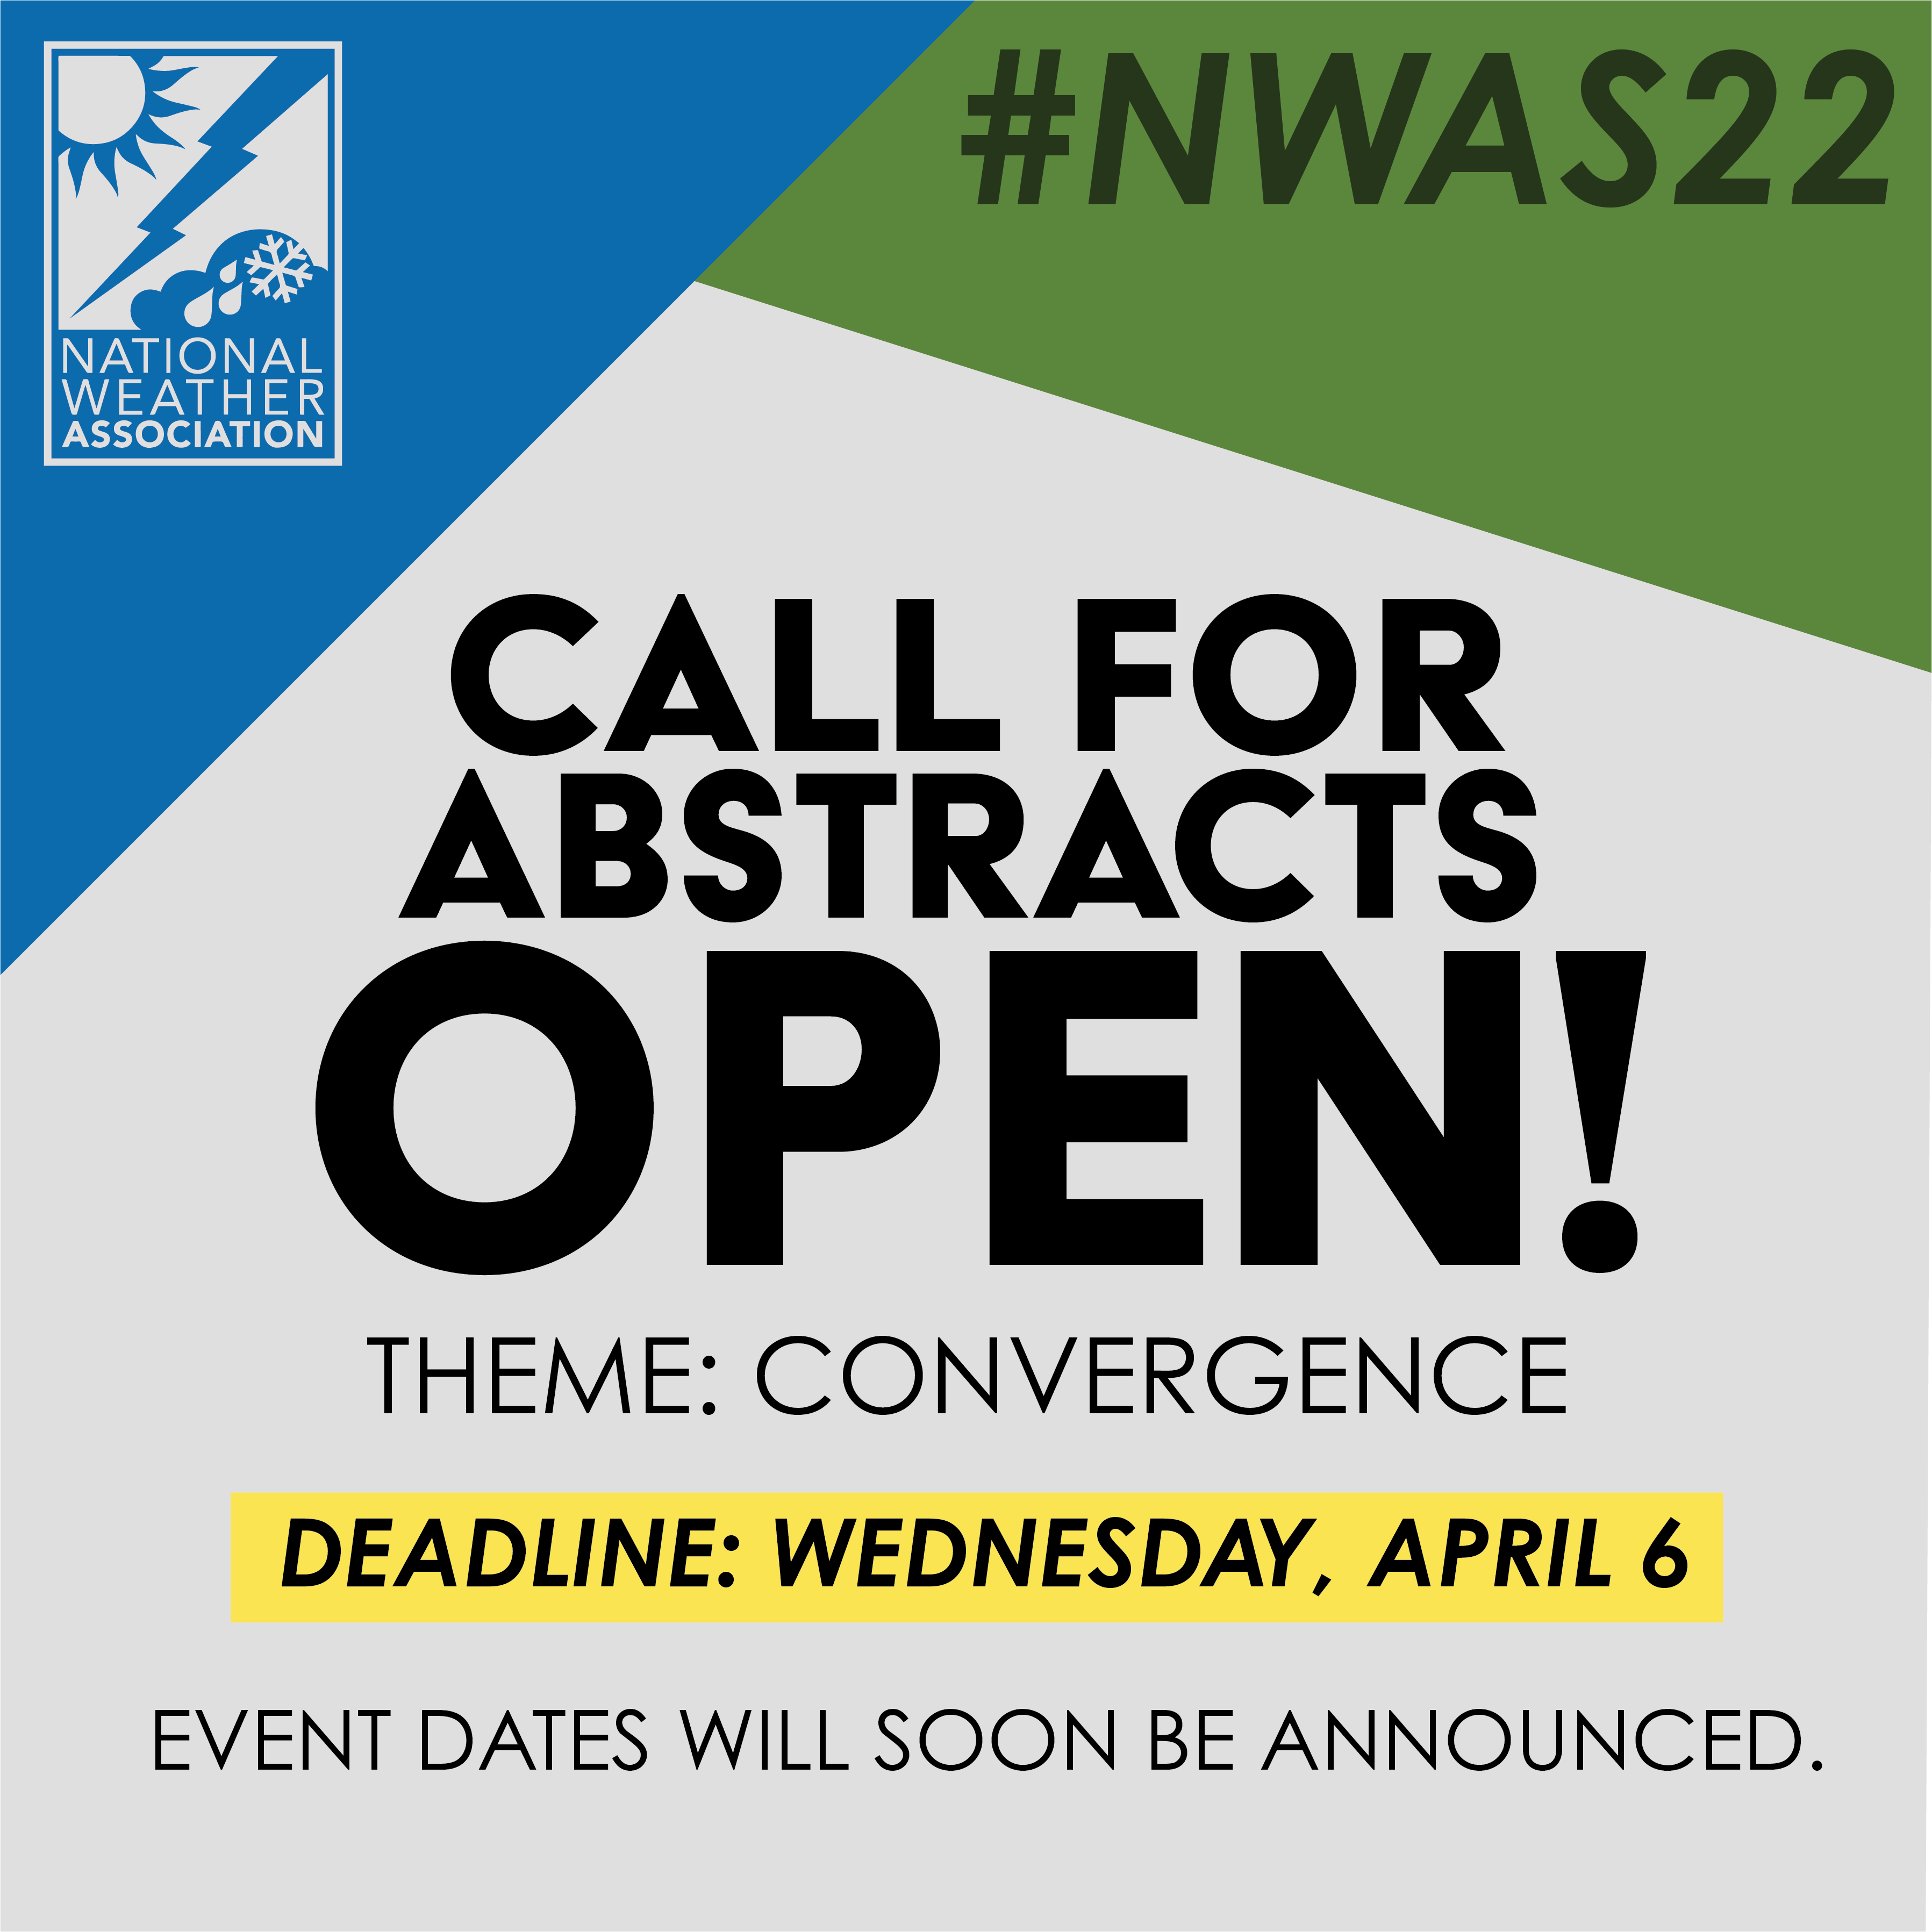 Call for Abstracts Open! Theme: Convergence. Deadline: Wednesday, April 6, 2022. 